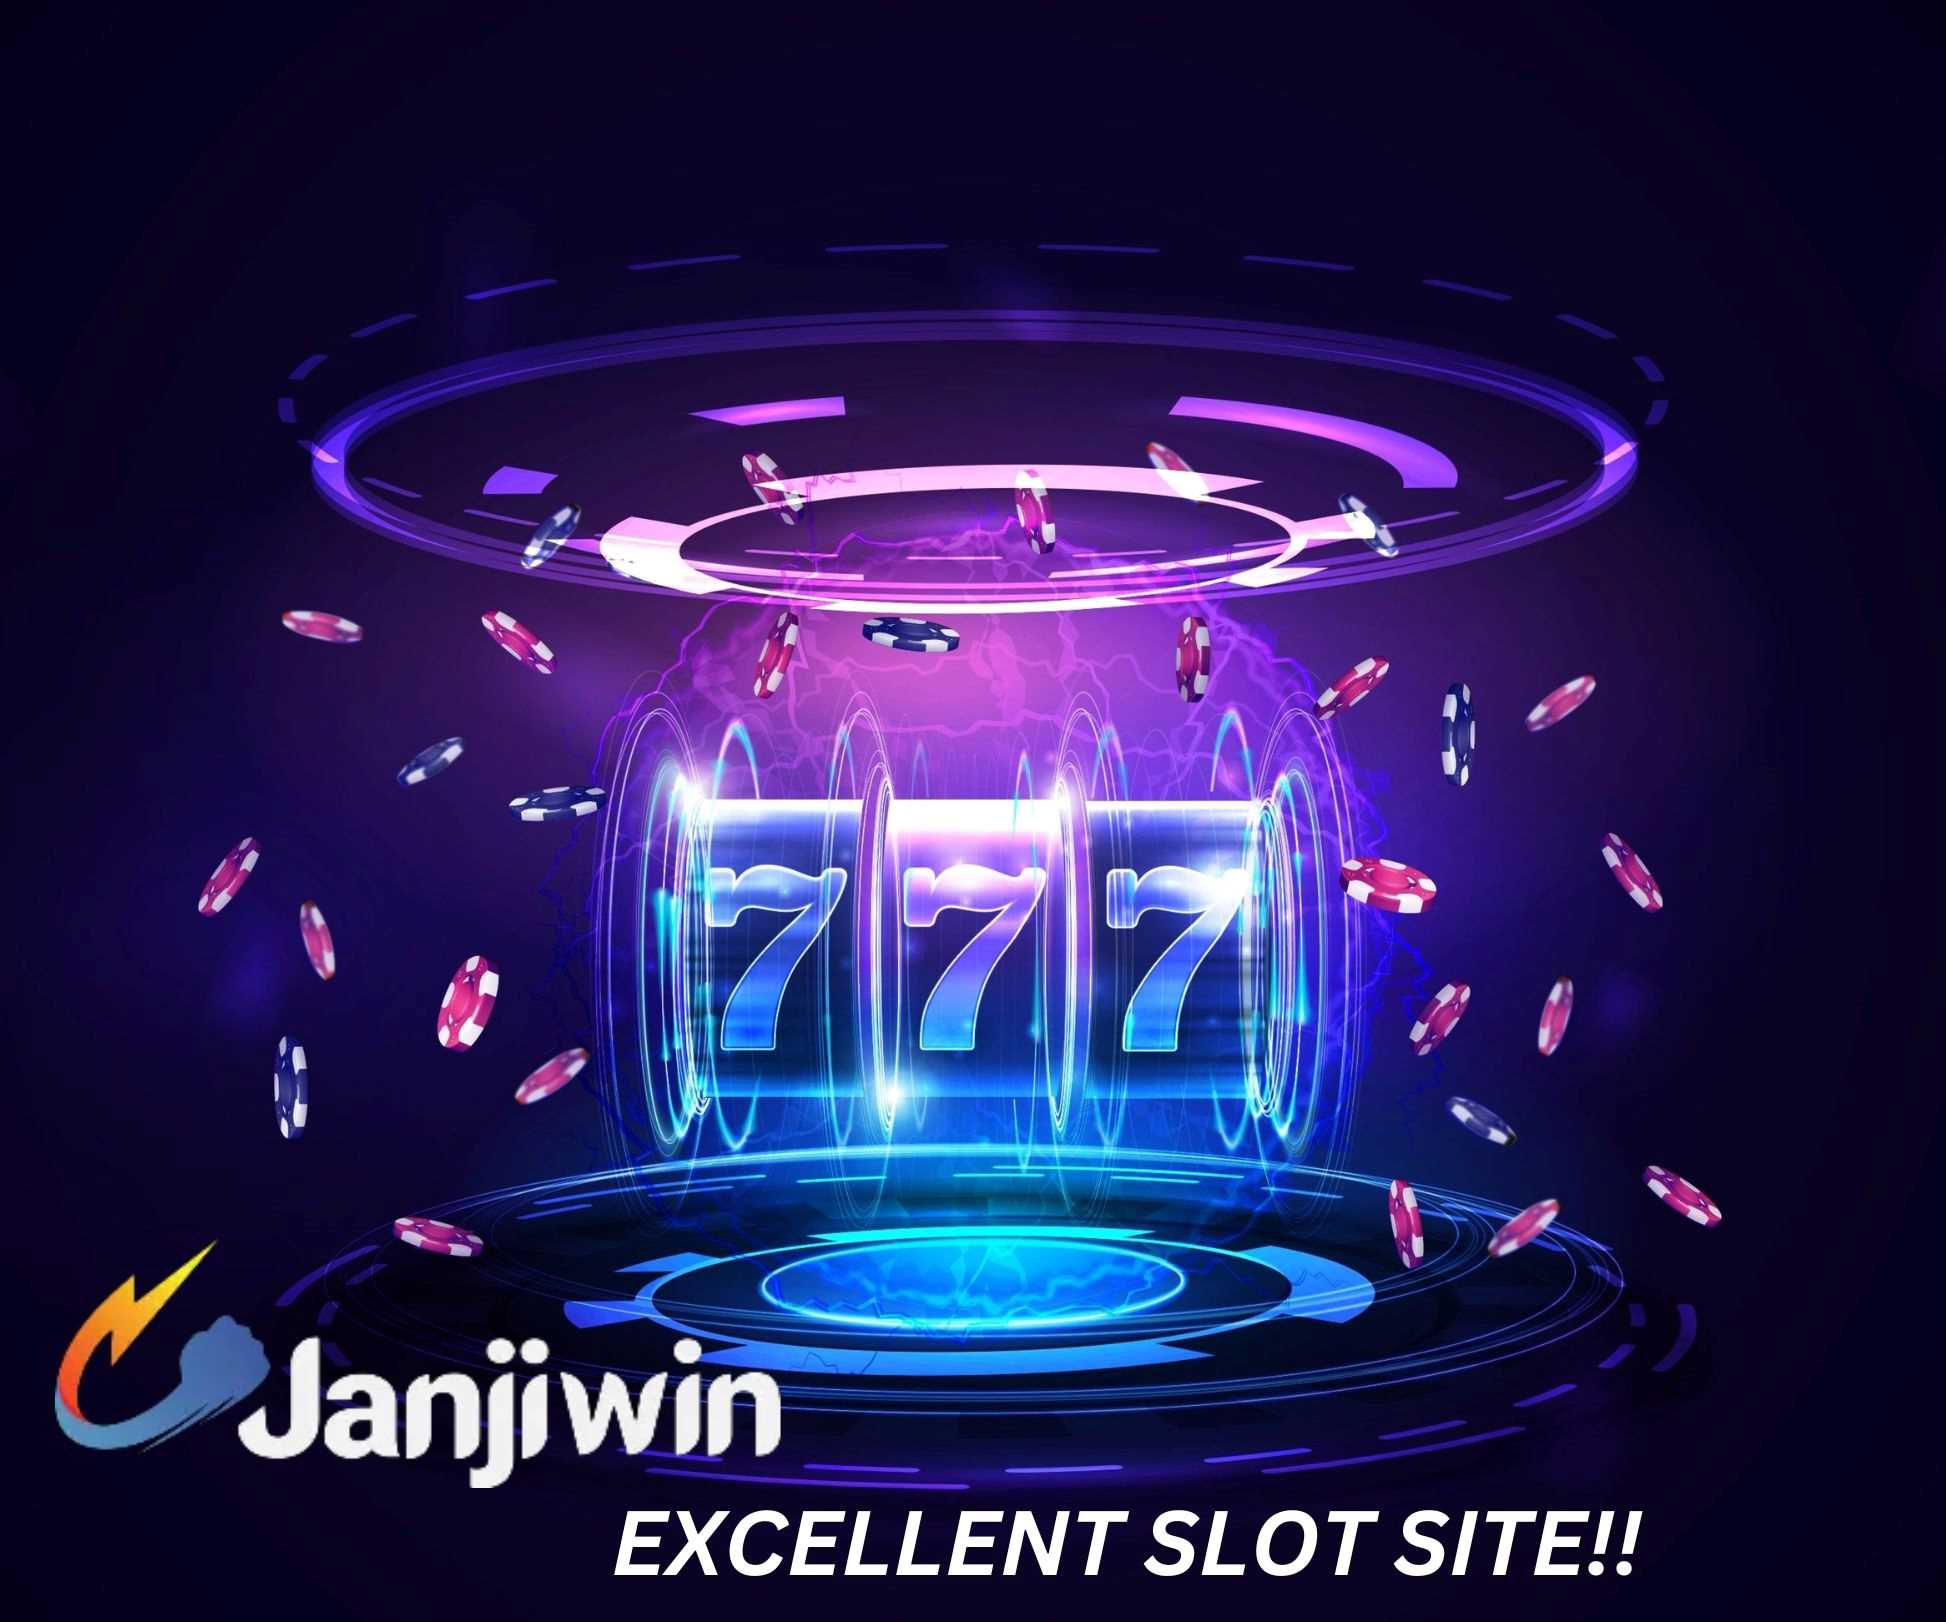 Tips for breaking the jackpot in slot games